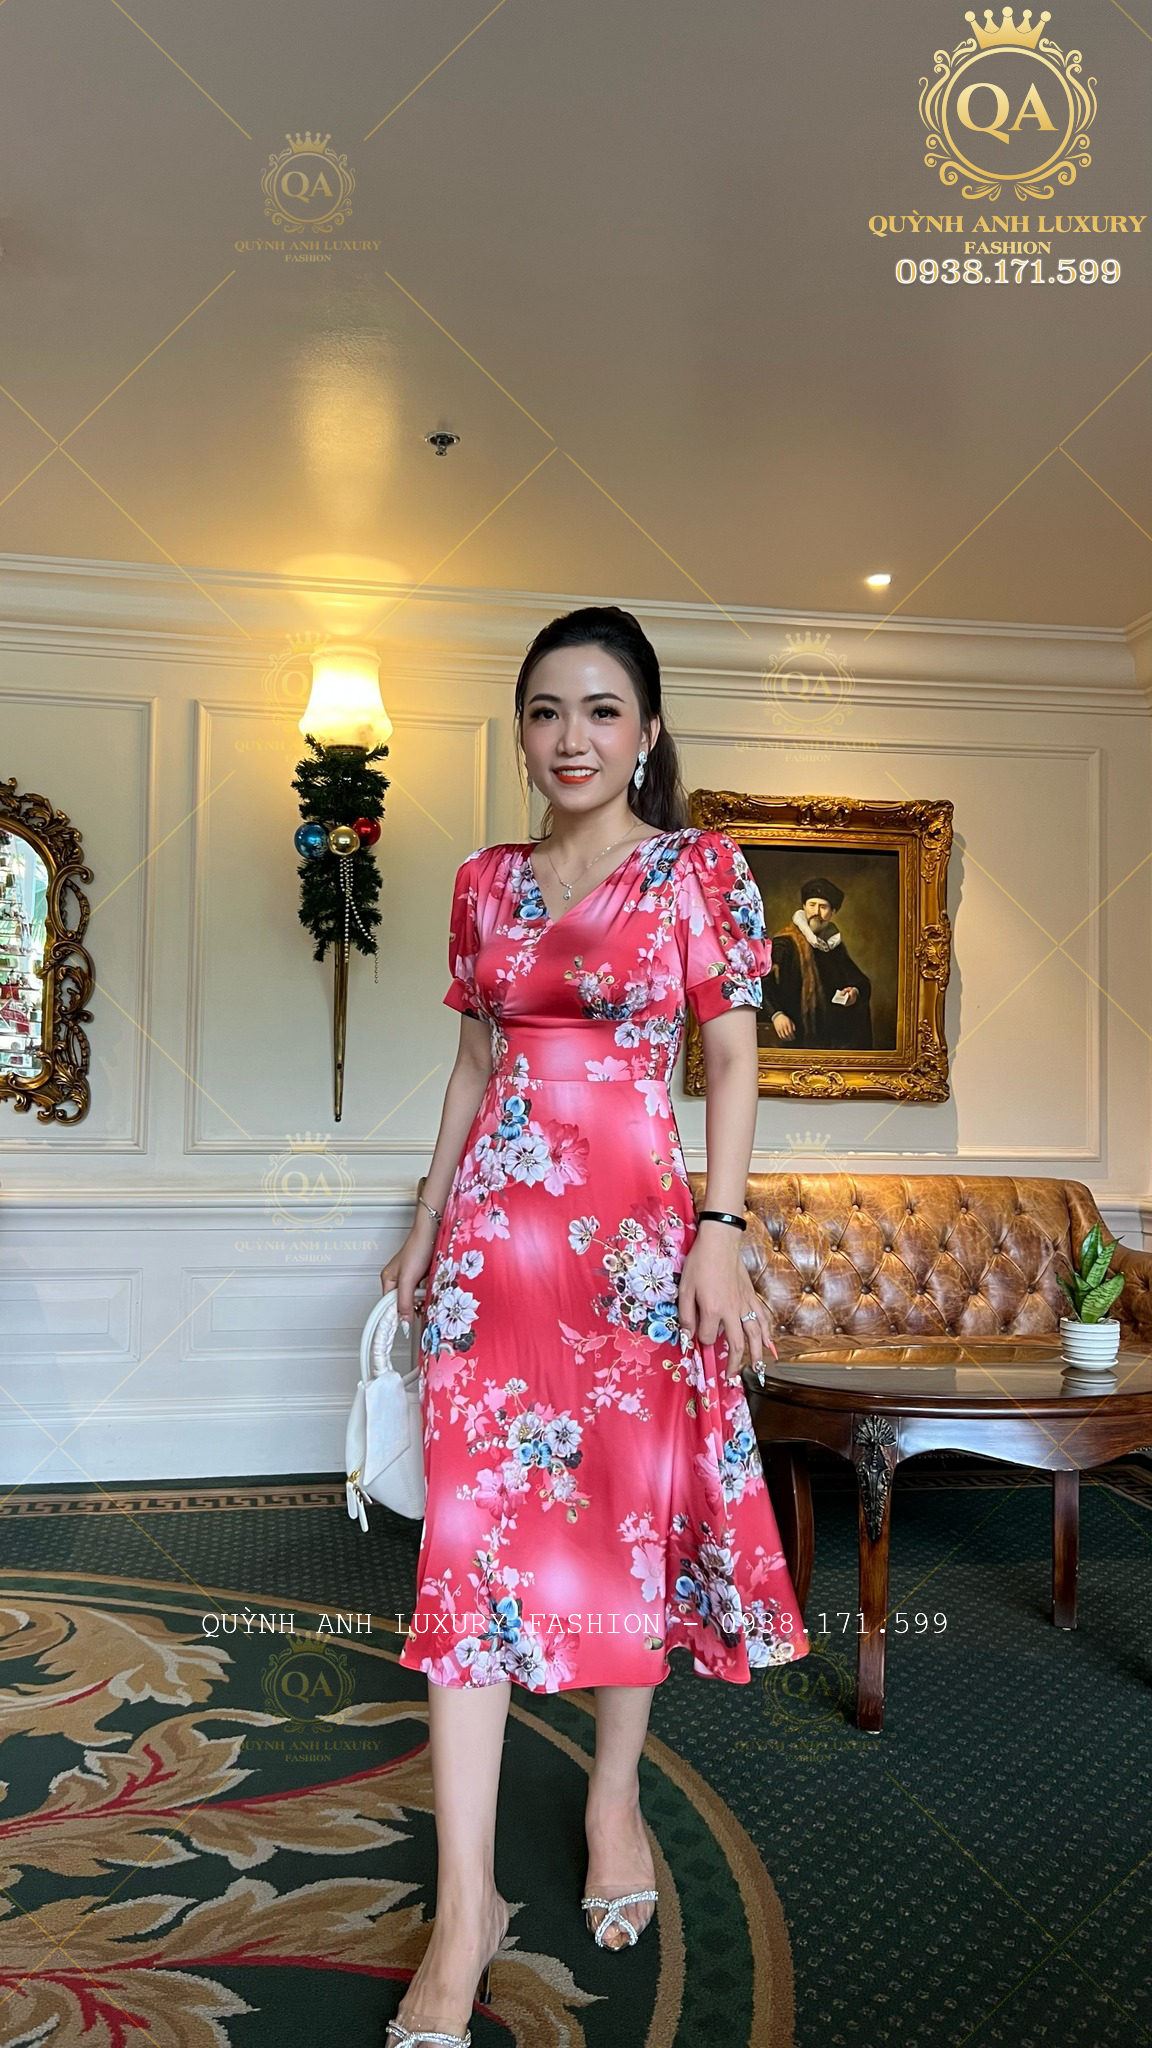 quynh-anh-luxury-shop-dam-ao-dai-trung-nien